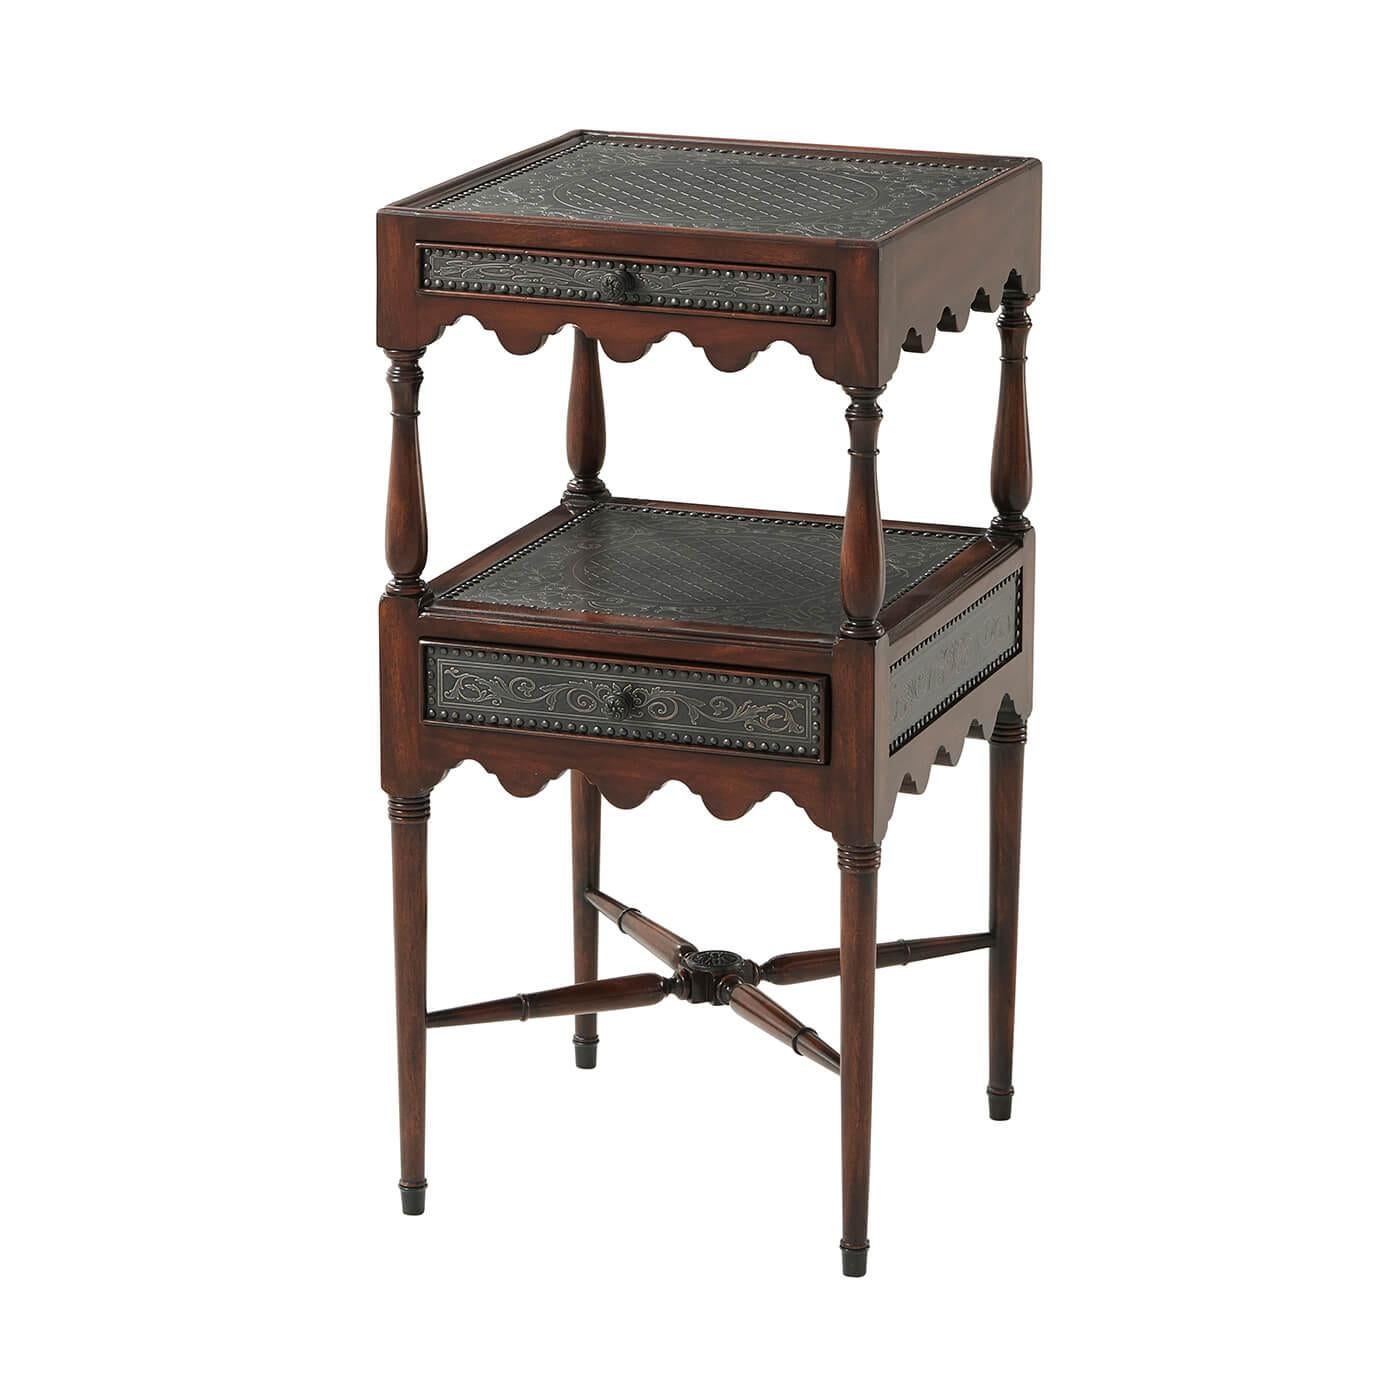 A Regency style solid two tier side table with engraved brass decoration, the top and under tier with floral frame lattice work cartouches to the panels and each fitted with a frieze drawer, between turned supports and with undulating aprons, on